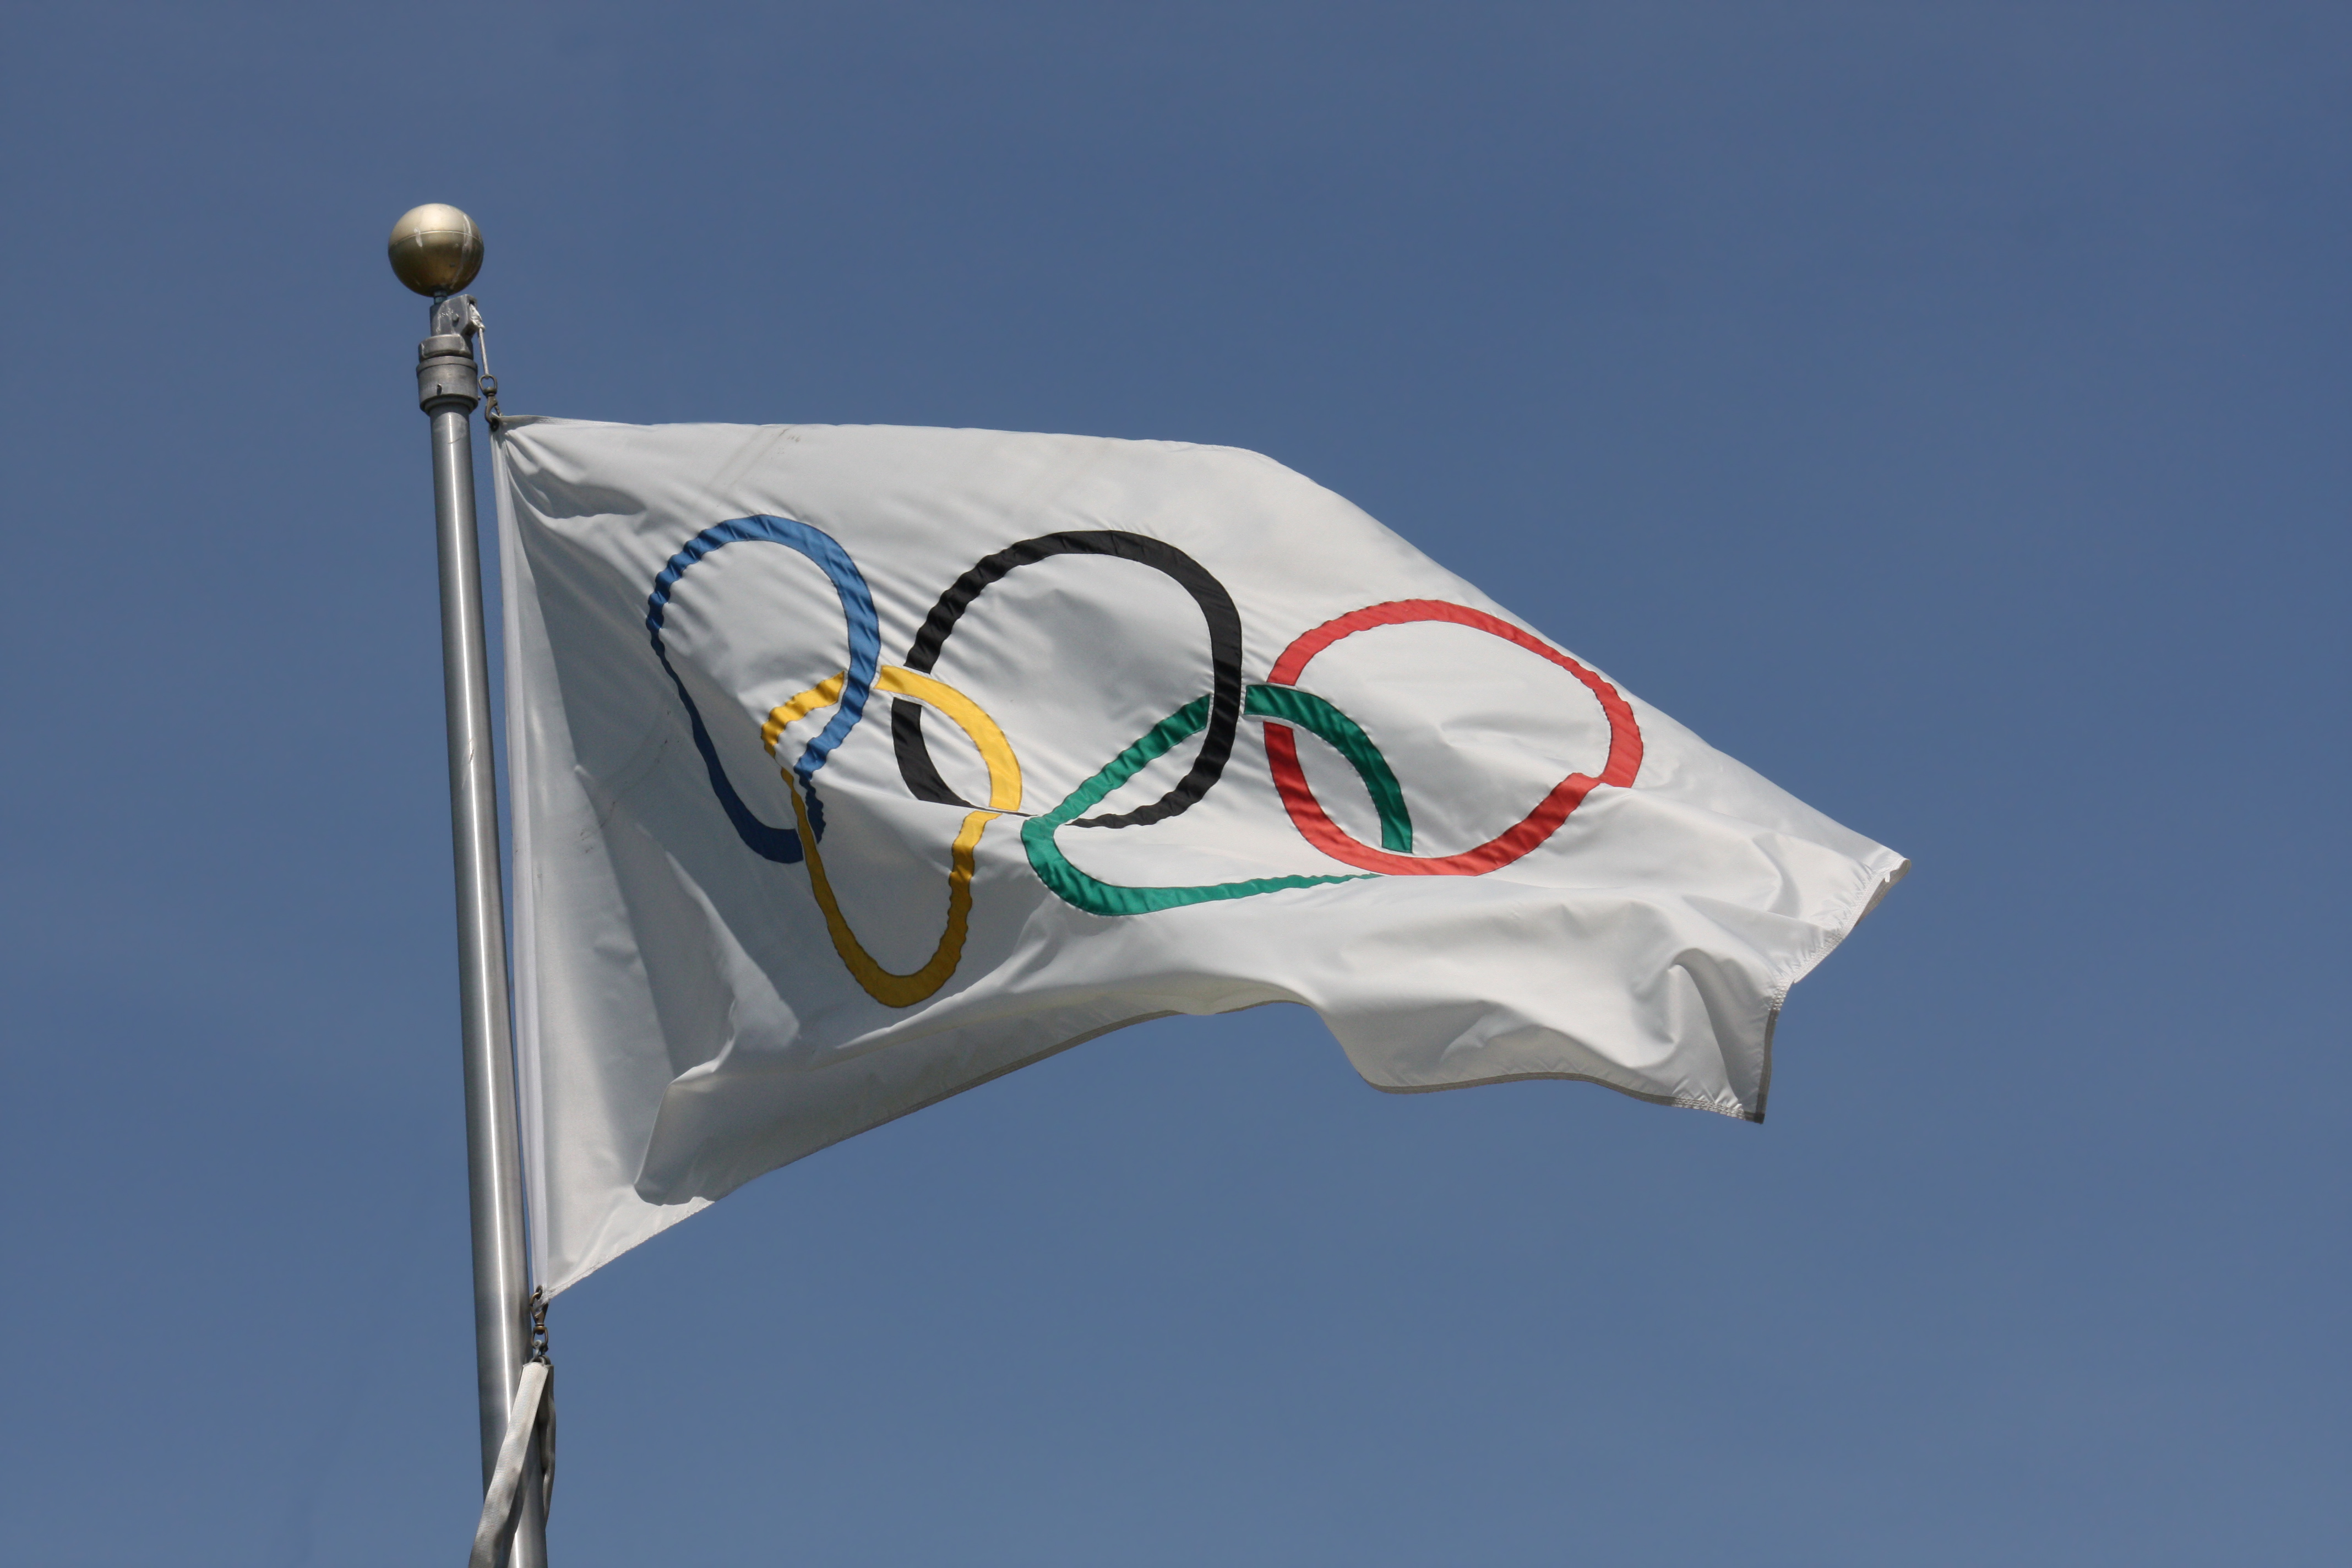 Medical assistance offered for Tokyo Olympics